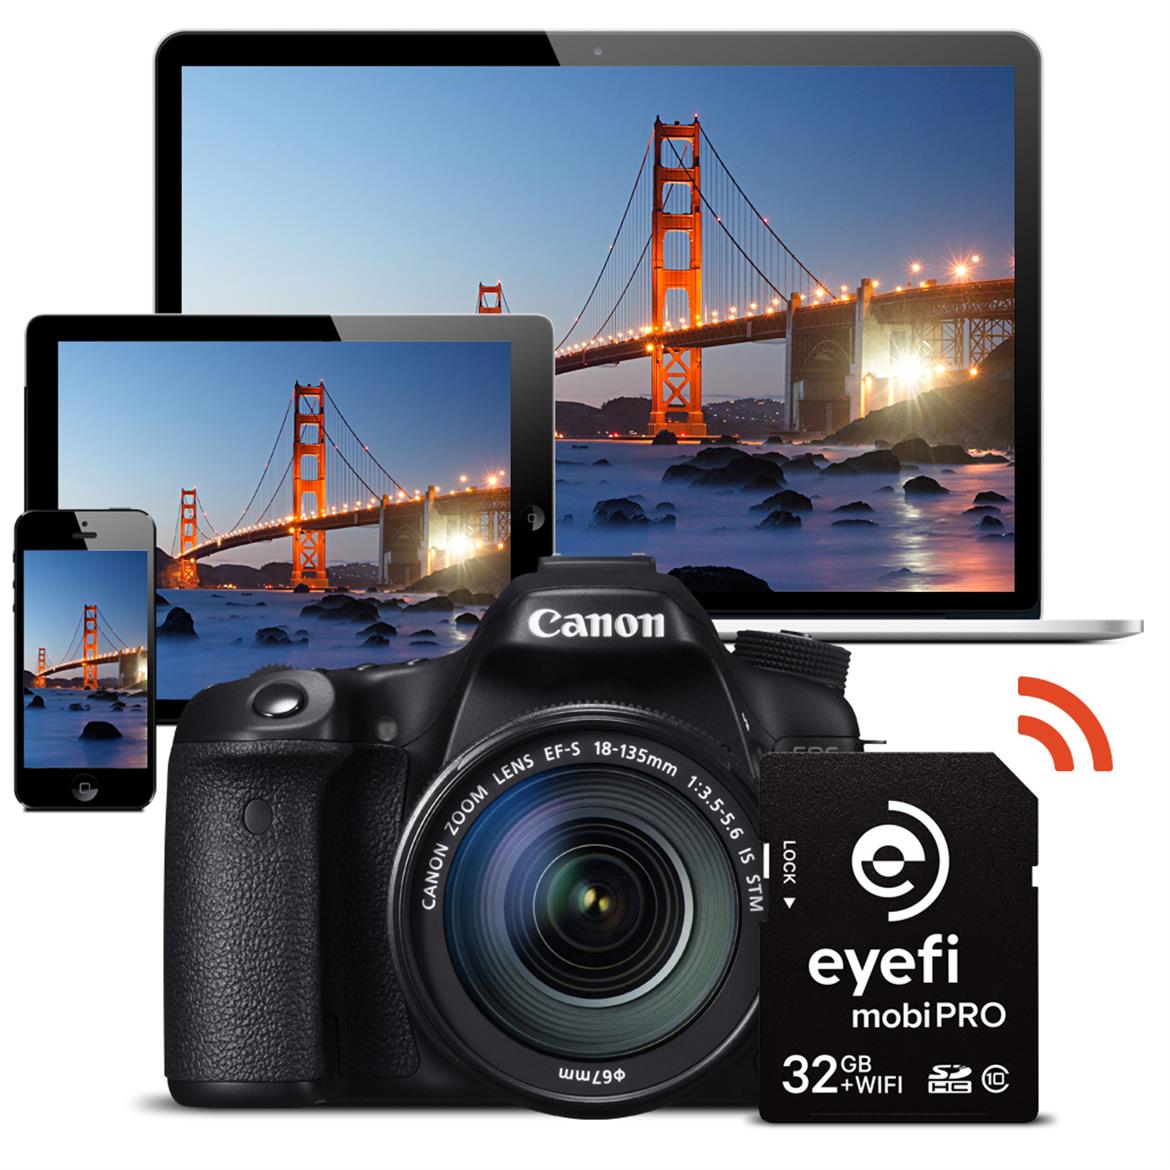 Eyefi Amps Up Convenience Factor For Photo Pros With 32GB Mobi Pro Wi-Fi SD Card